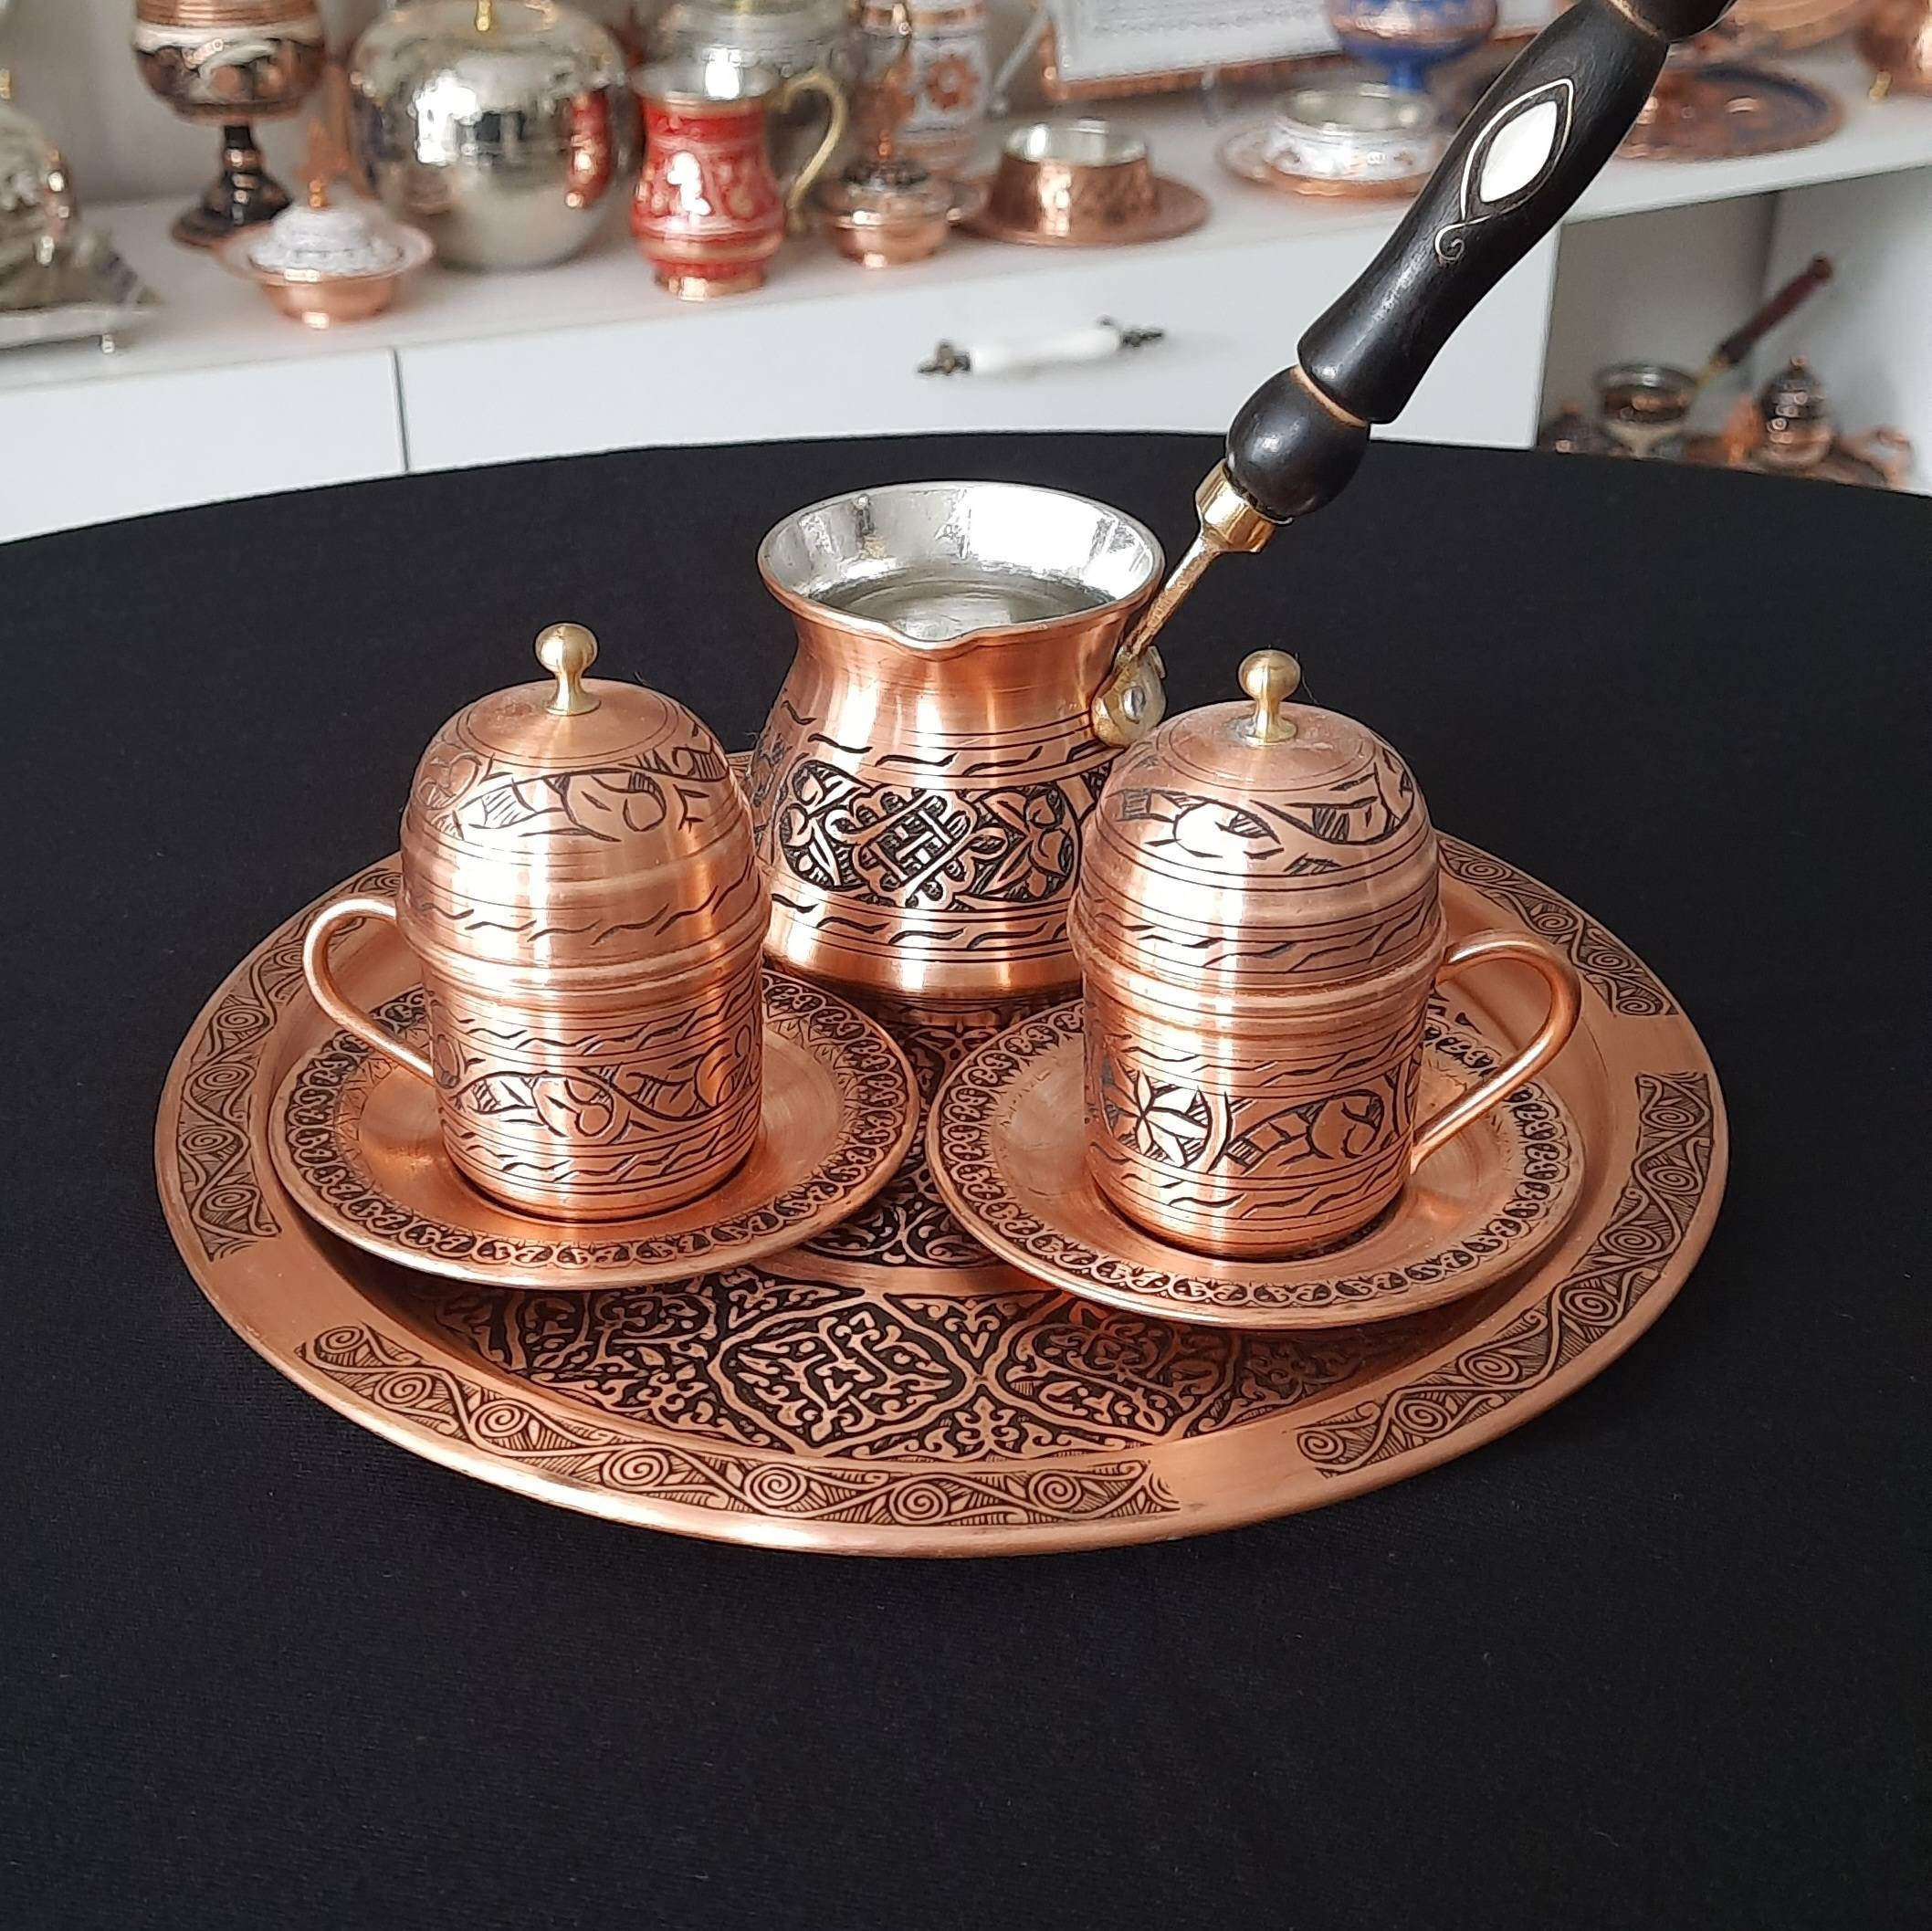 Turkish Coffee Cup, Copper Coffee Cup, Unique Gift Ideas, Birthday Gift,  Arabic Coffee Cup, Keepsake Gifts, Anniversary Gifts, Rustic 